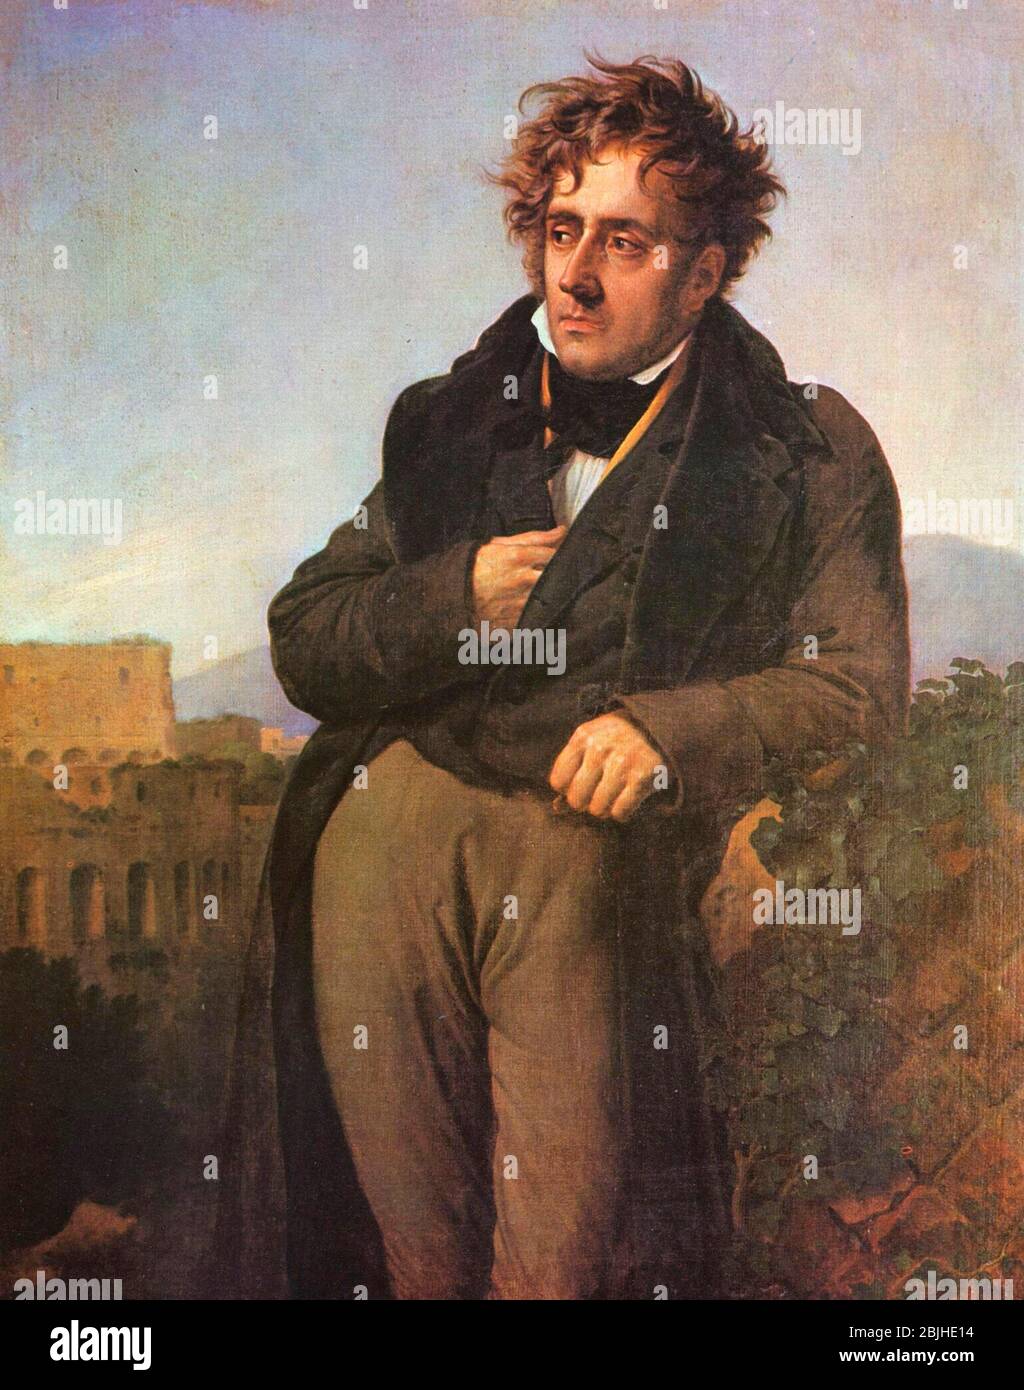 Chateaubriand meditating on the Ruins of Rome - Anne-Louis Girodet de Roussy-Trioson, circa 1808 Foto Stock